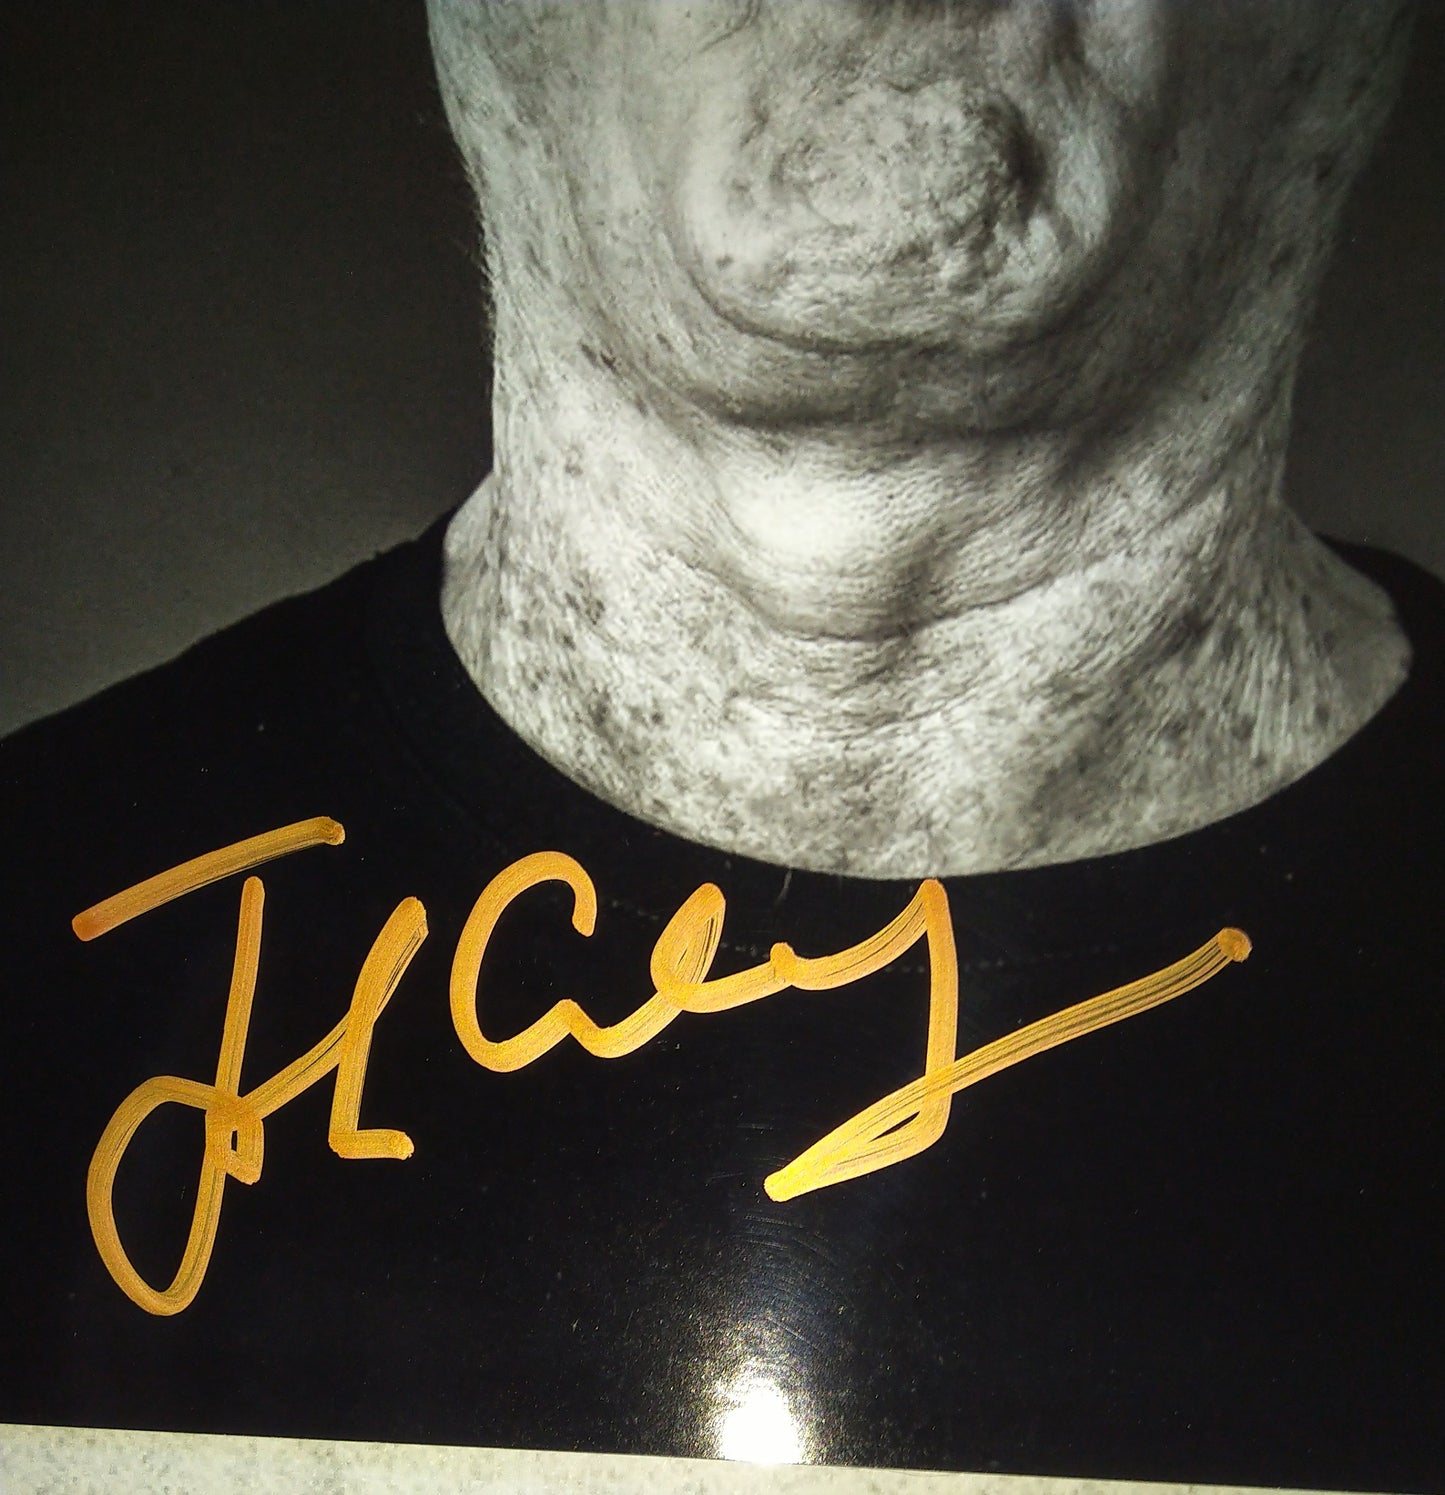 John Cleese Hand Signed Autograph 8x10 Photo